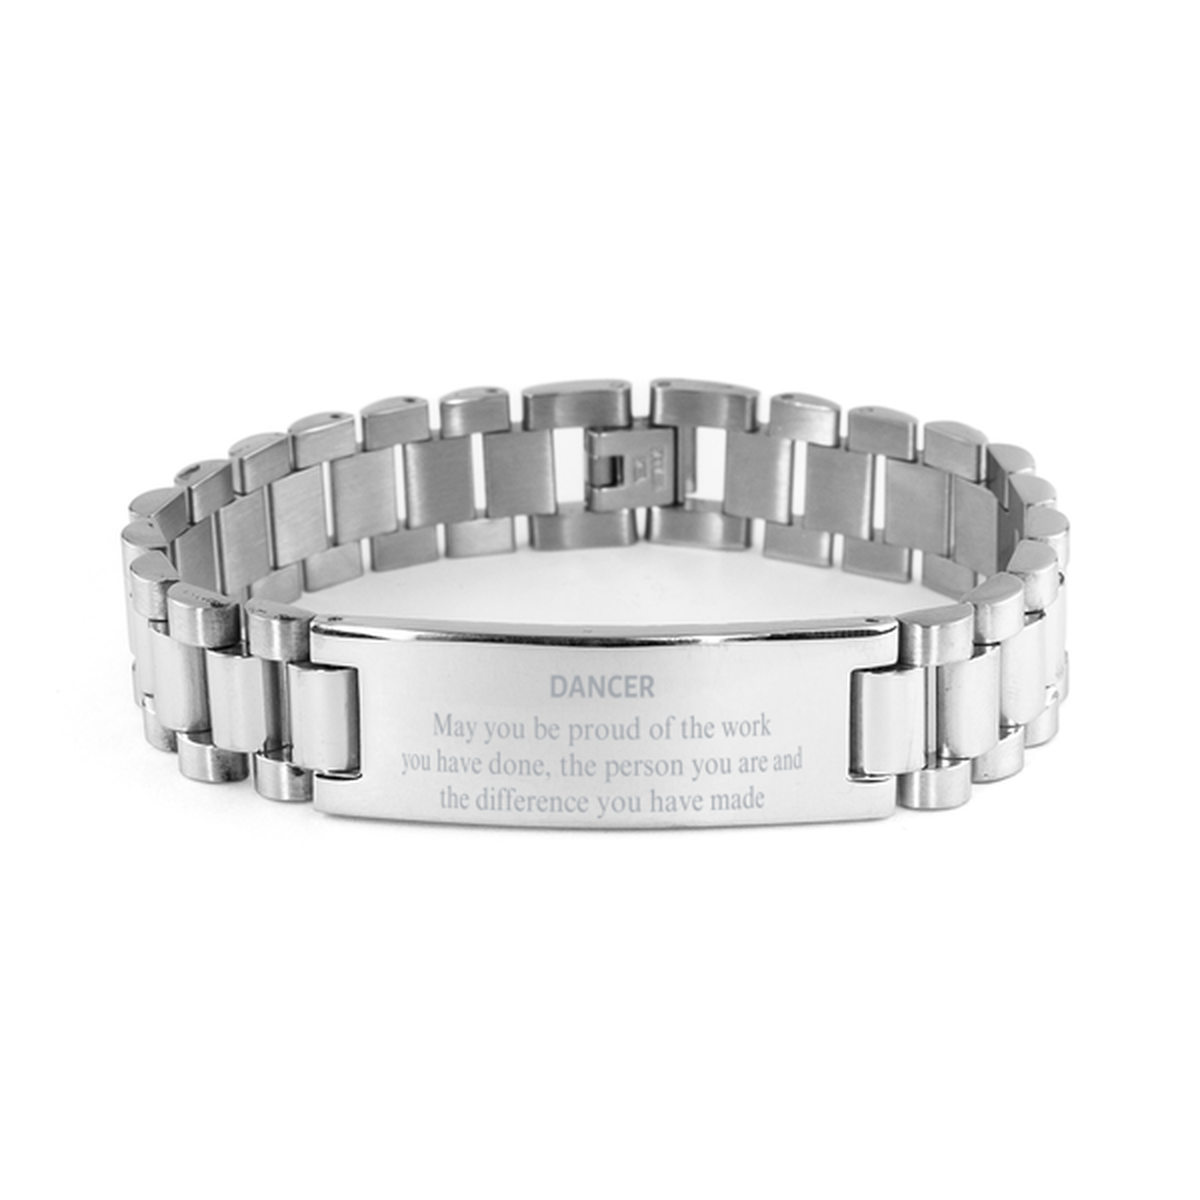 Dancer May you be proud of the work you have done, Retirement Dancer Ladder Stainless Steel Bracelet for Colleague Appreciation Gifts Amazing for Dancer